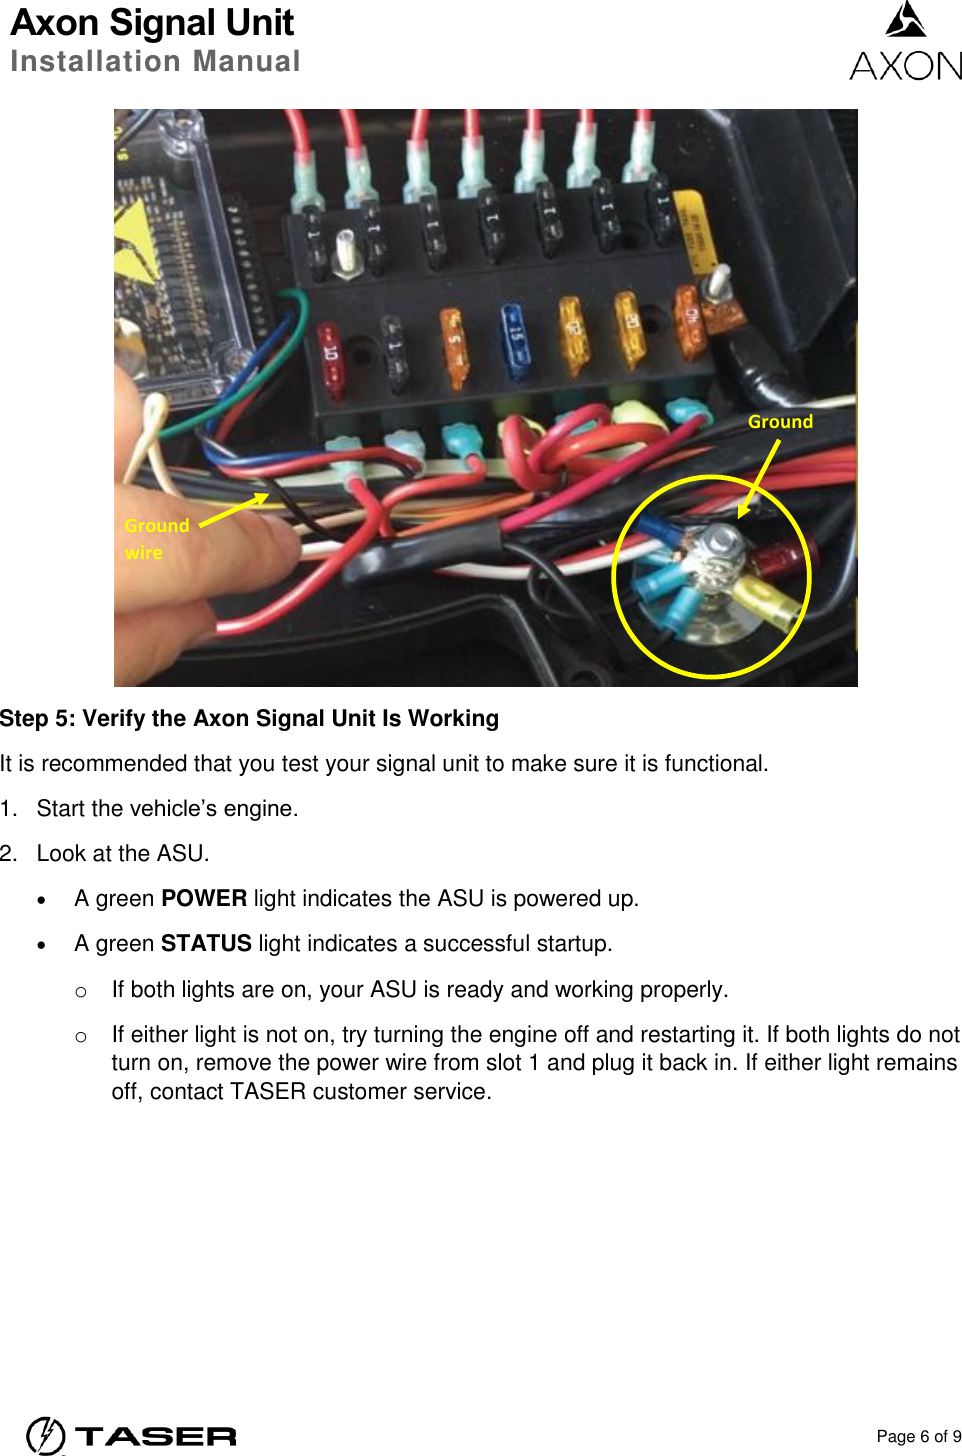 Axon Signal Unit Installation Manual    Page 6 of 9   Step 5: Verify the Axon Signal Unit Is Working It is recommended that you test your signal unit to make sure it is functional. 1.  Start the vehicle’s engine. 2.  Look at the ASU.  A green POWER light indicates the ASU is powered up.  A green STATUS light indicates a successful startup.  o  If both lights are on, your ASU is ready and working properly.  o  If either light is not on, try turning the engine off and restarting it. If both lights do not turn on, remove the power wire from slot 1 and plug it back in. If either light remains off, contact TASER customer service.  Ground wire Ground 